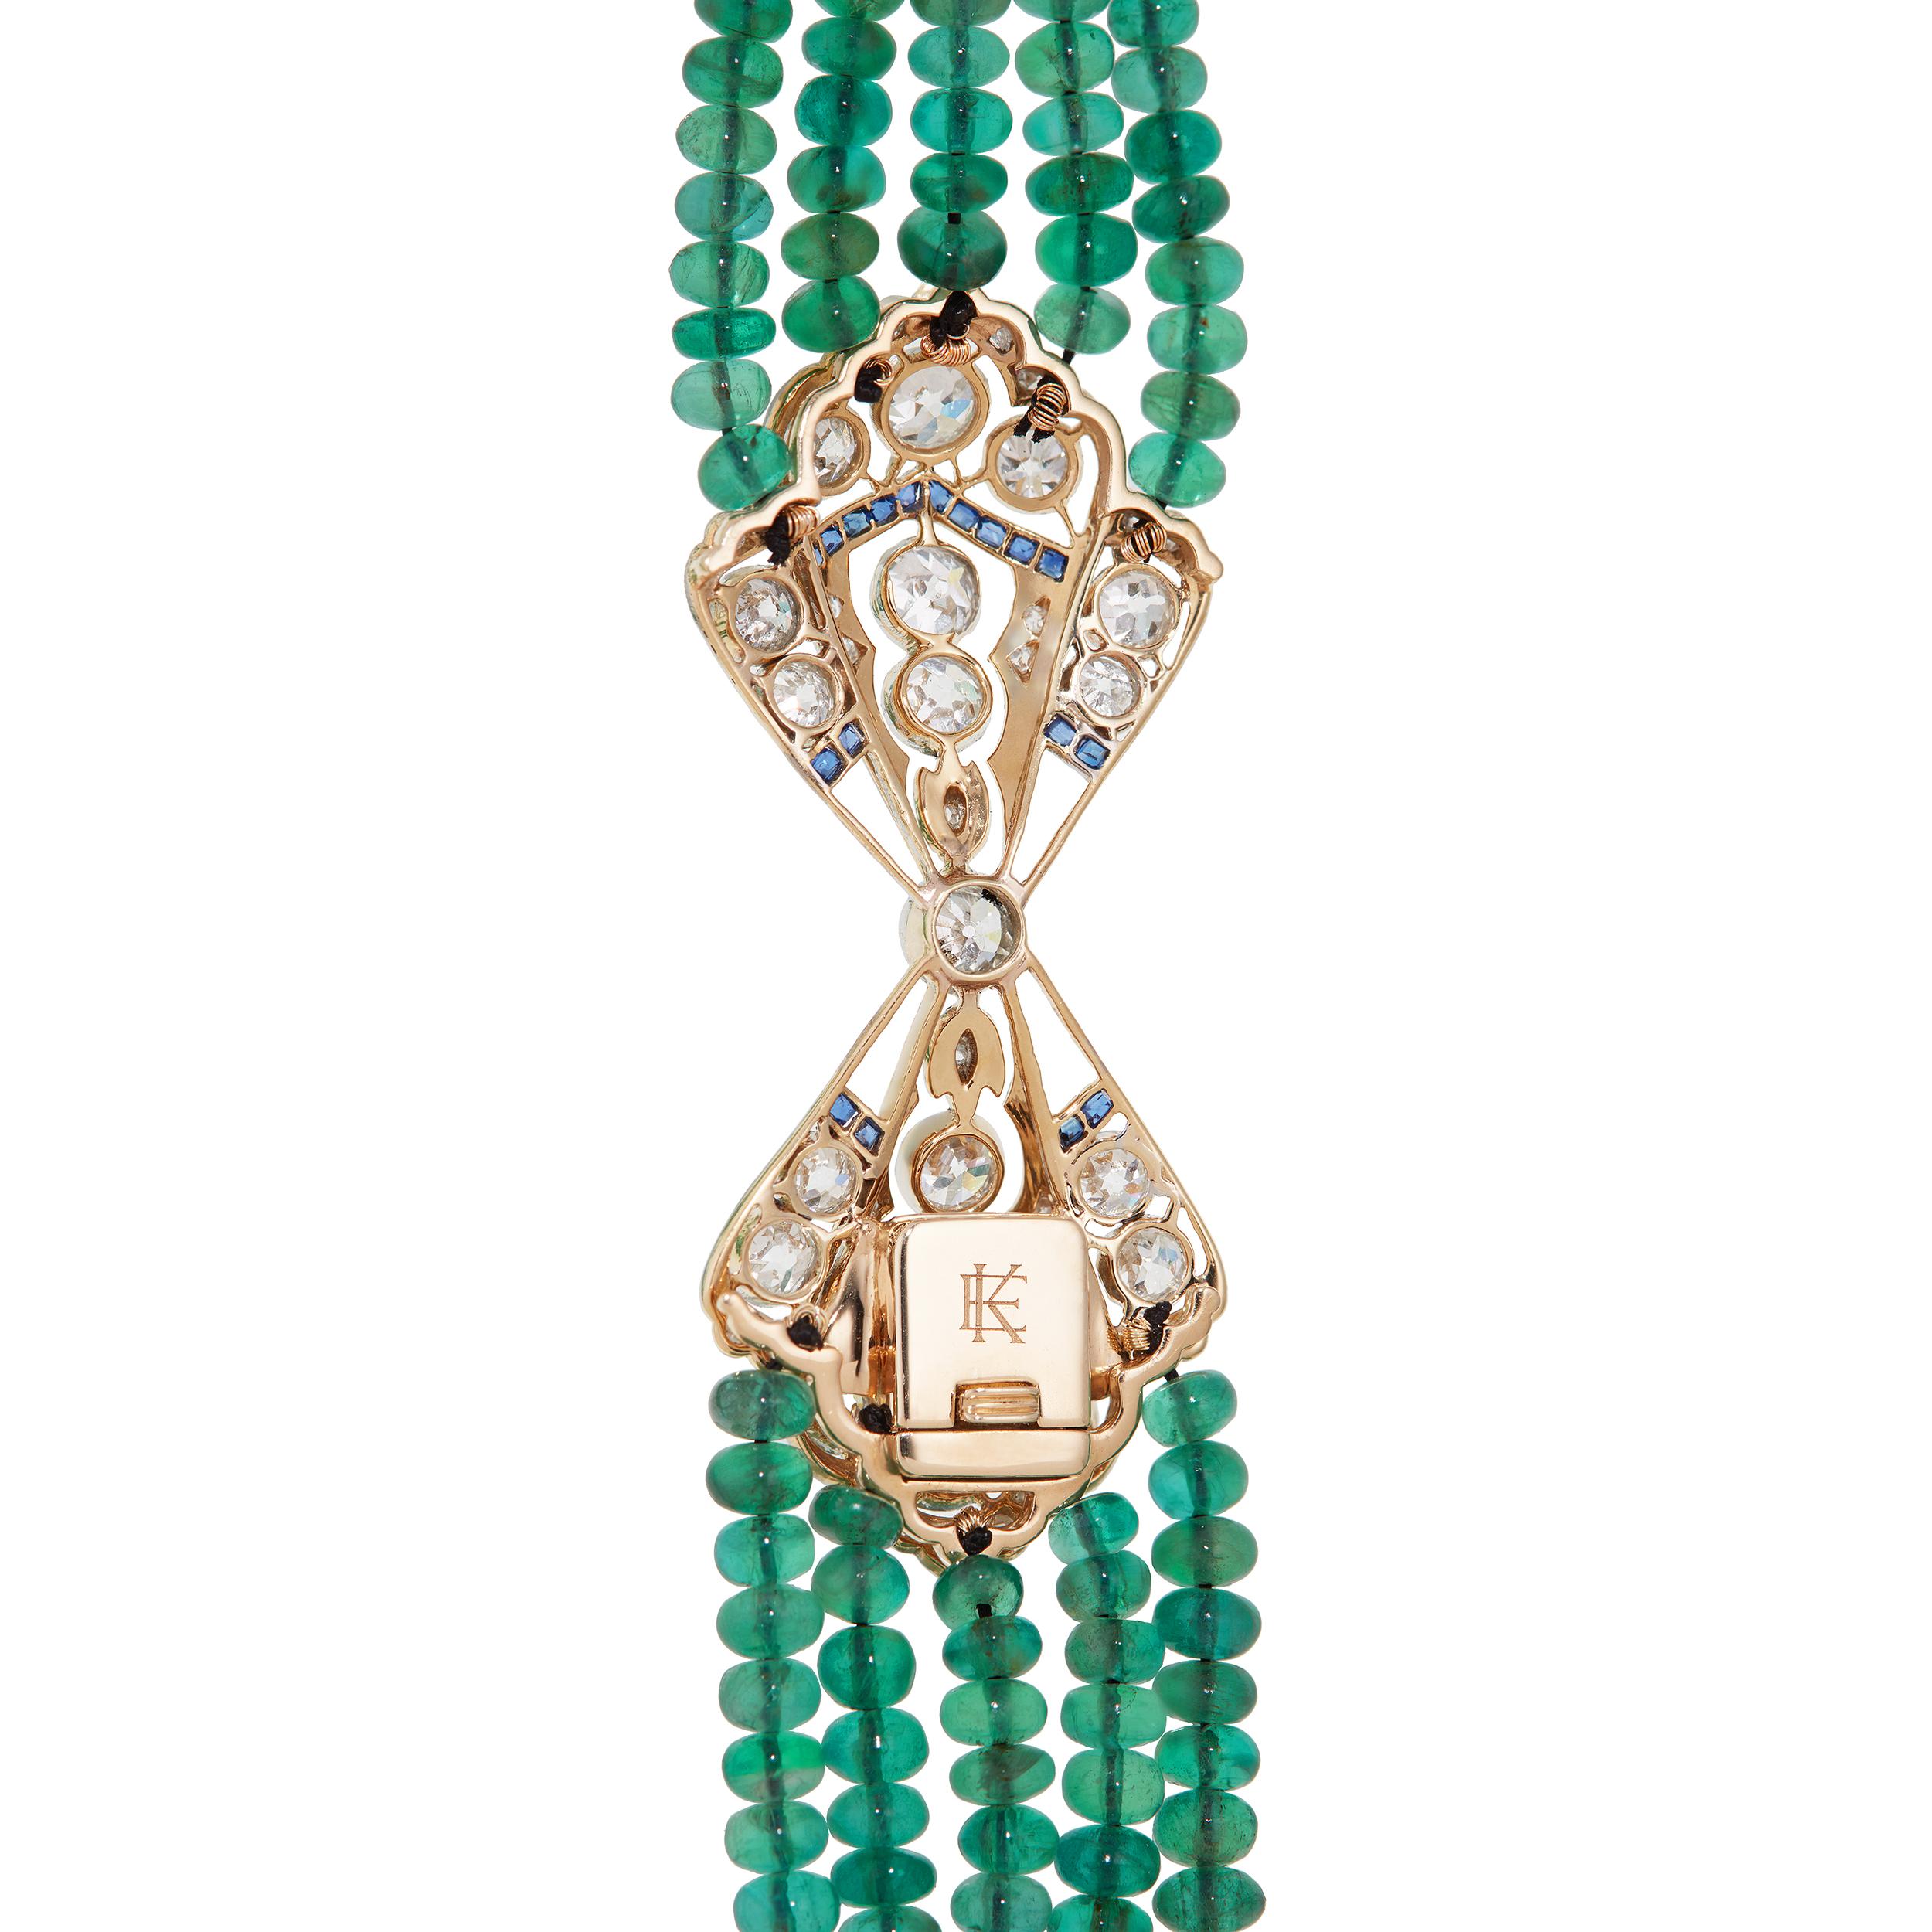 Art Deco 385 Carat 5-Strand Emerald Necklace with 9.06 Carat Sapphire and Diamond in Plat For Sale